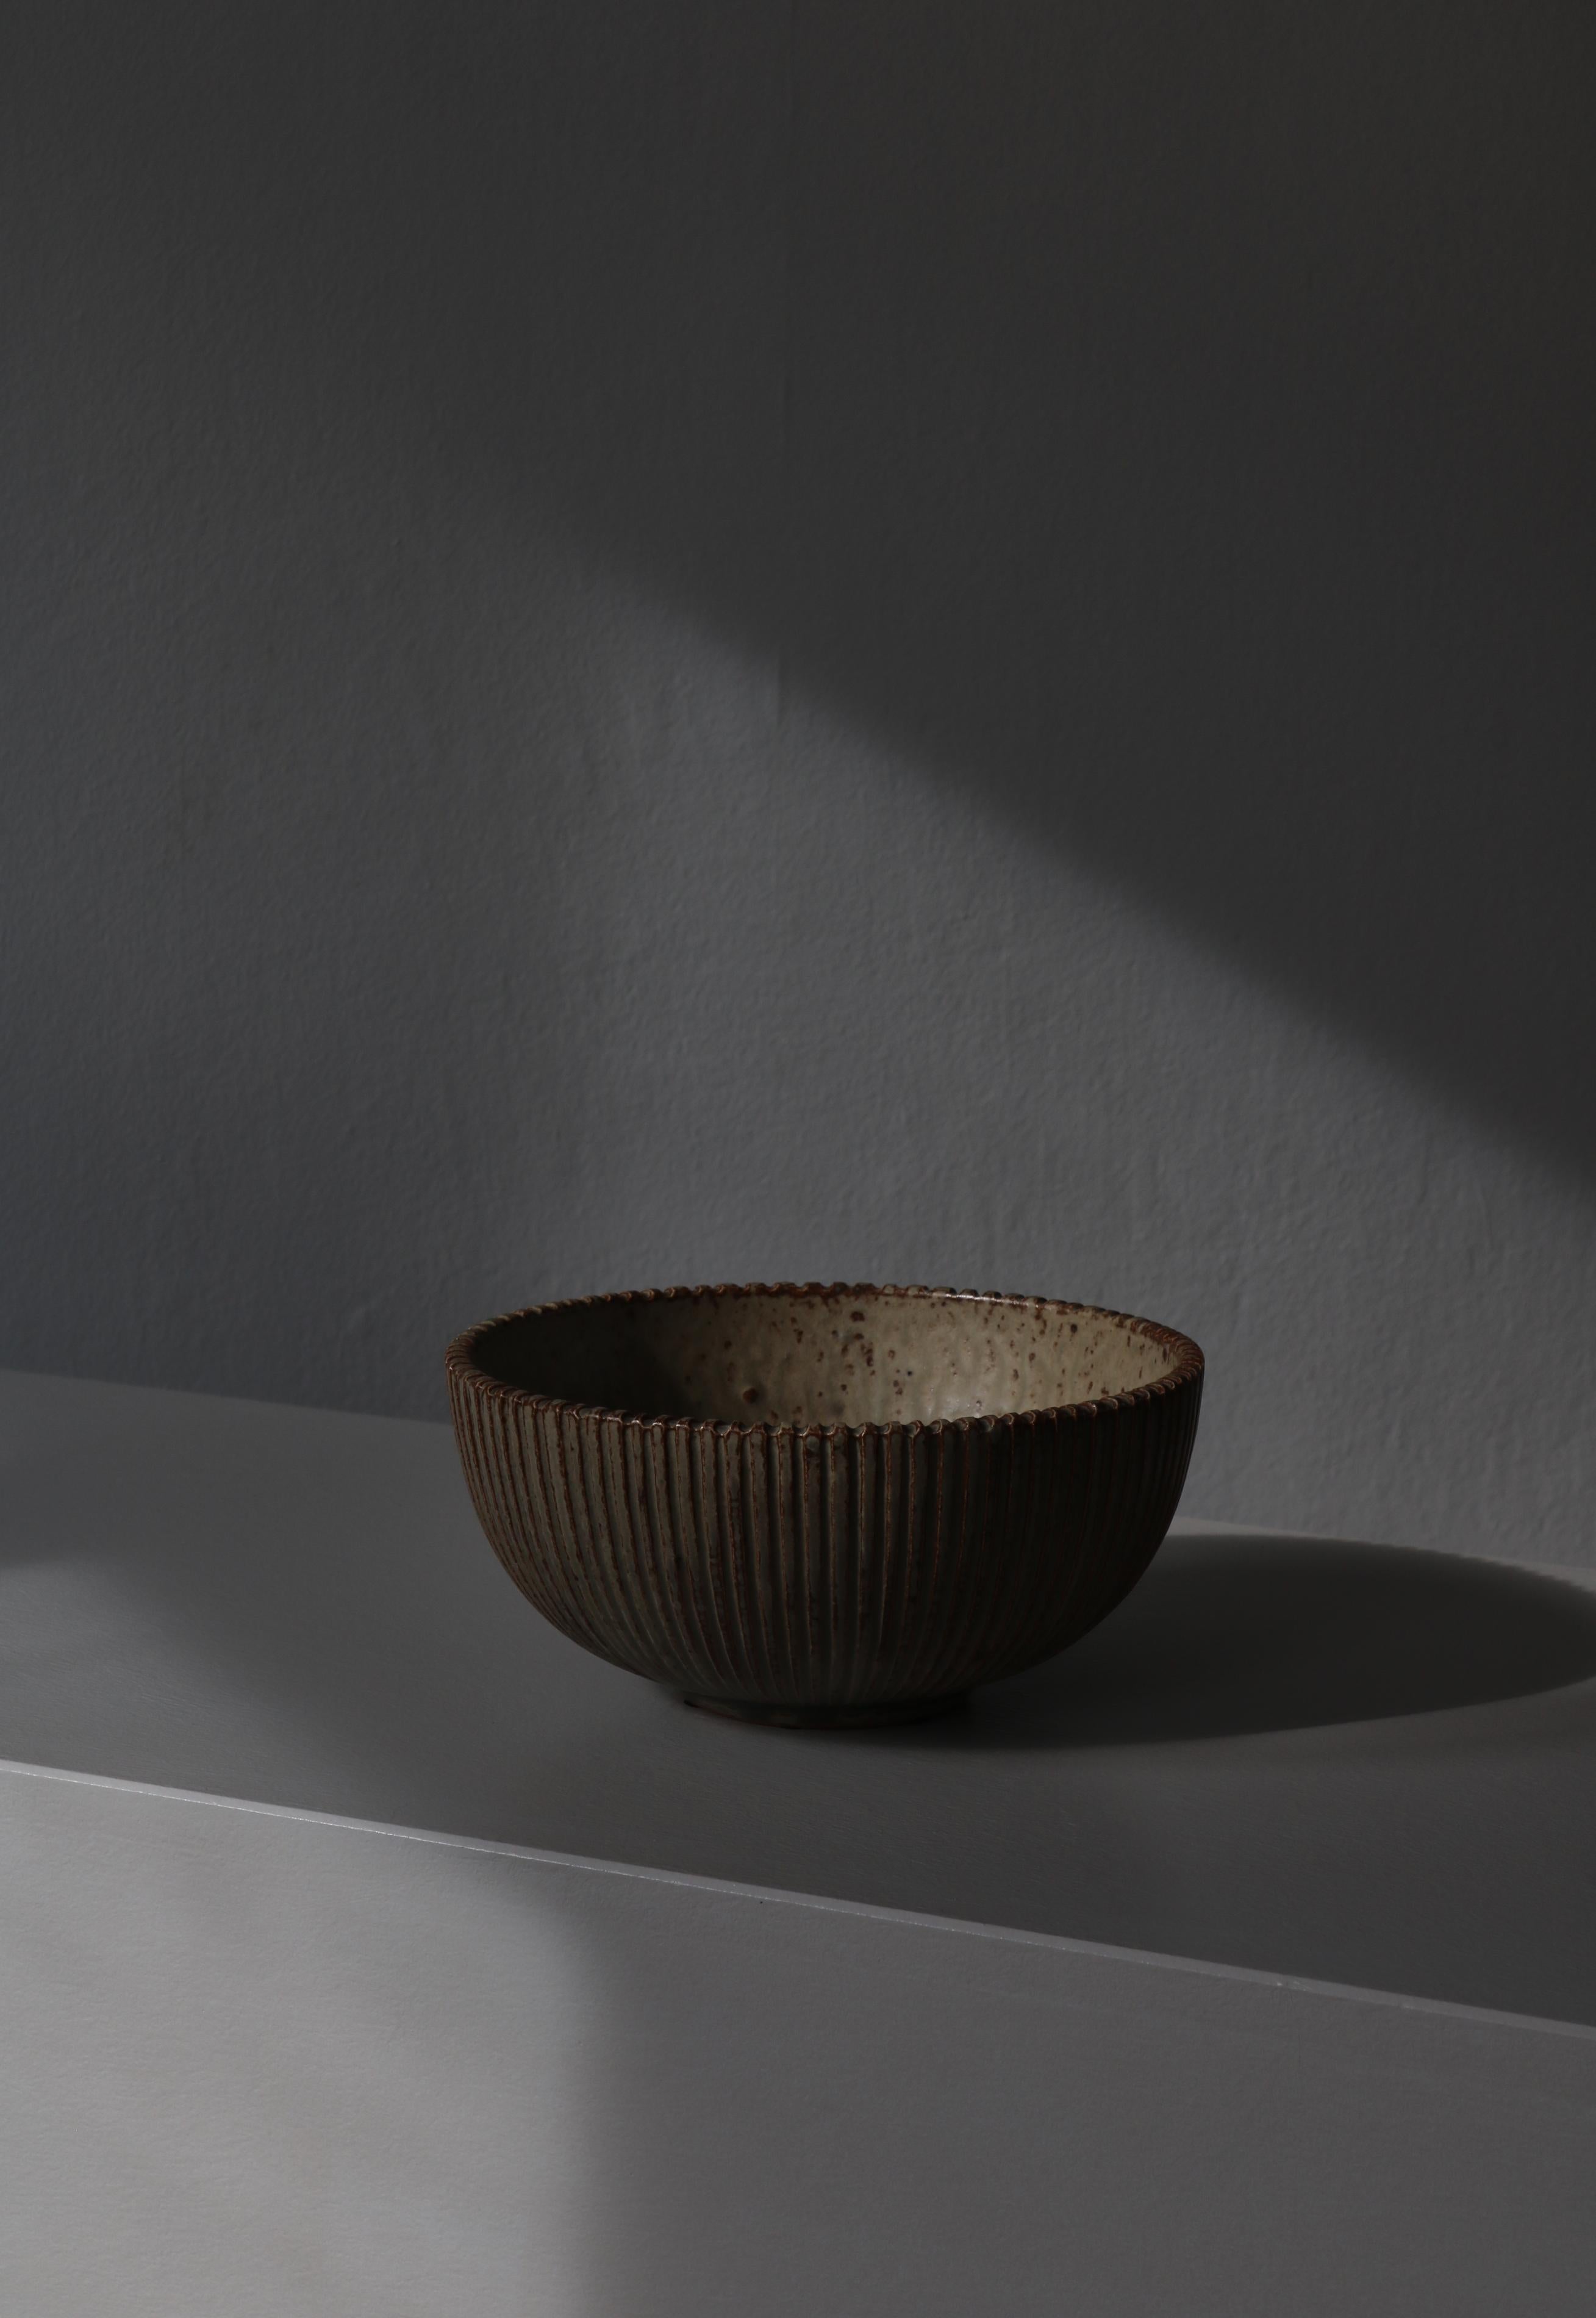 Fluted stoneware bowl with beautiful grey-greenish glaze made by Danish artist Arne Bang at his own studio in Copenhagen the 1930s. Signed with monogram 